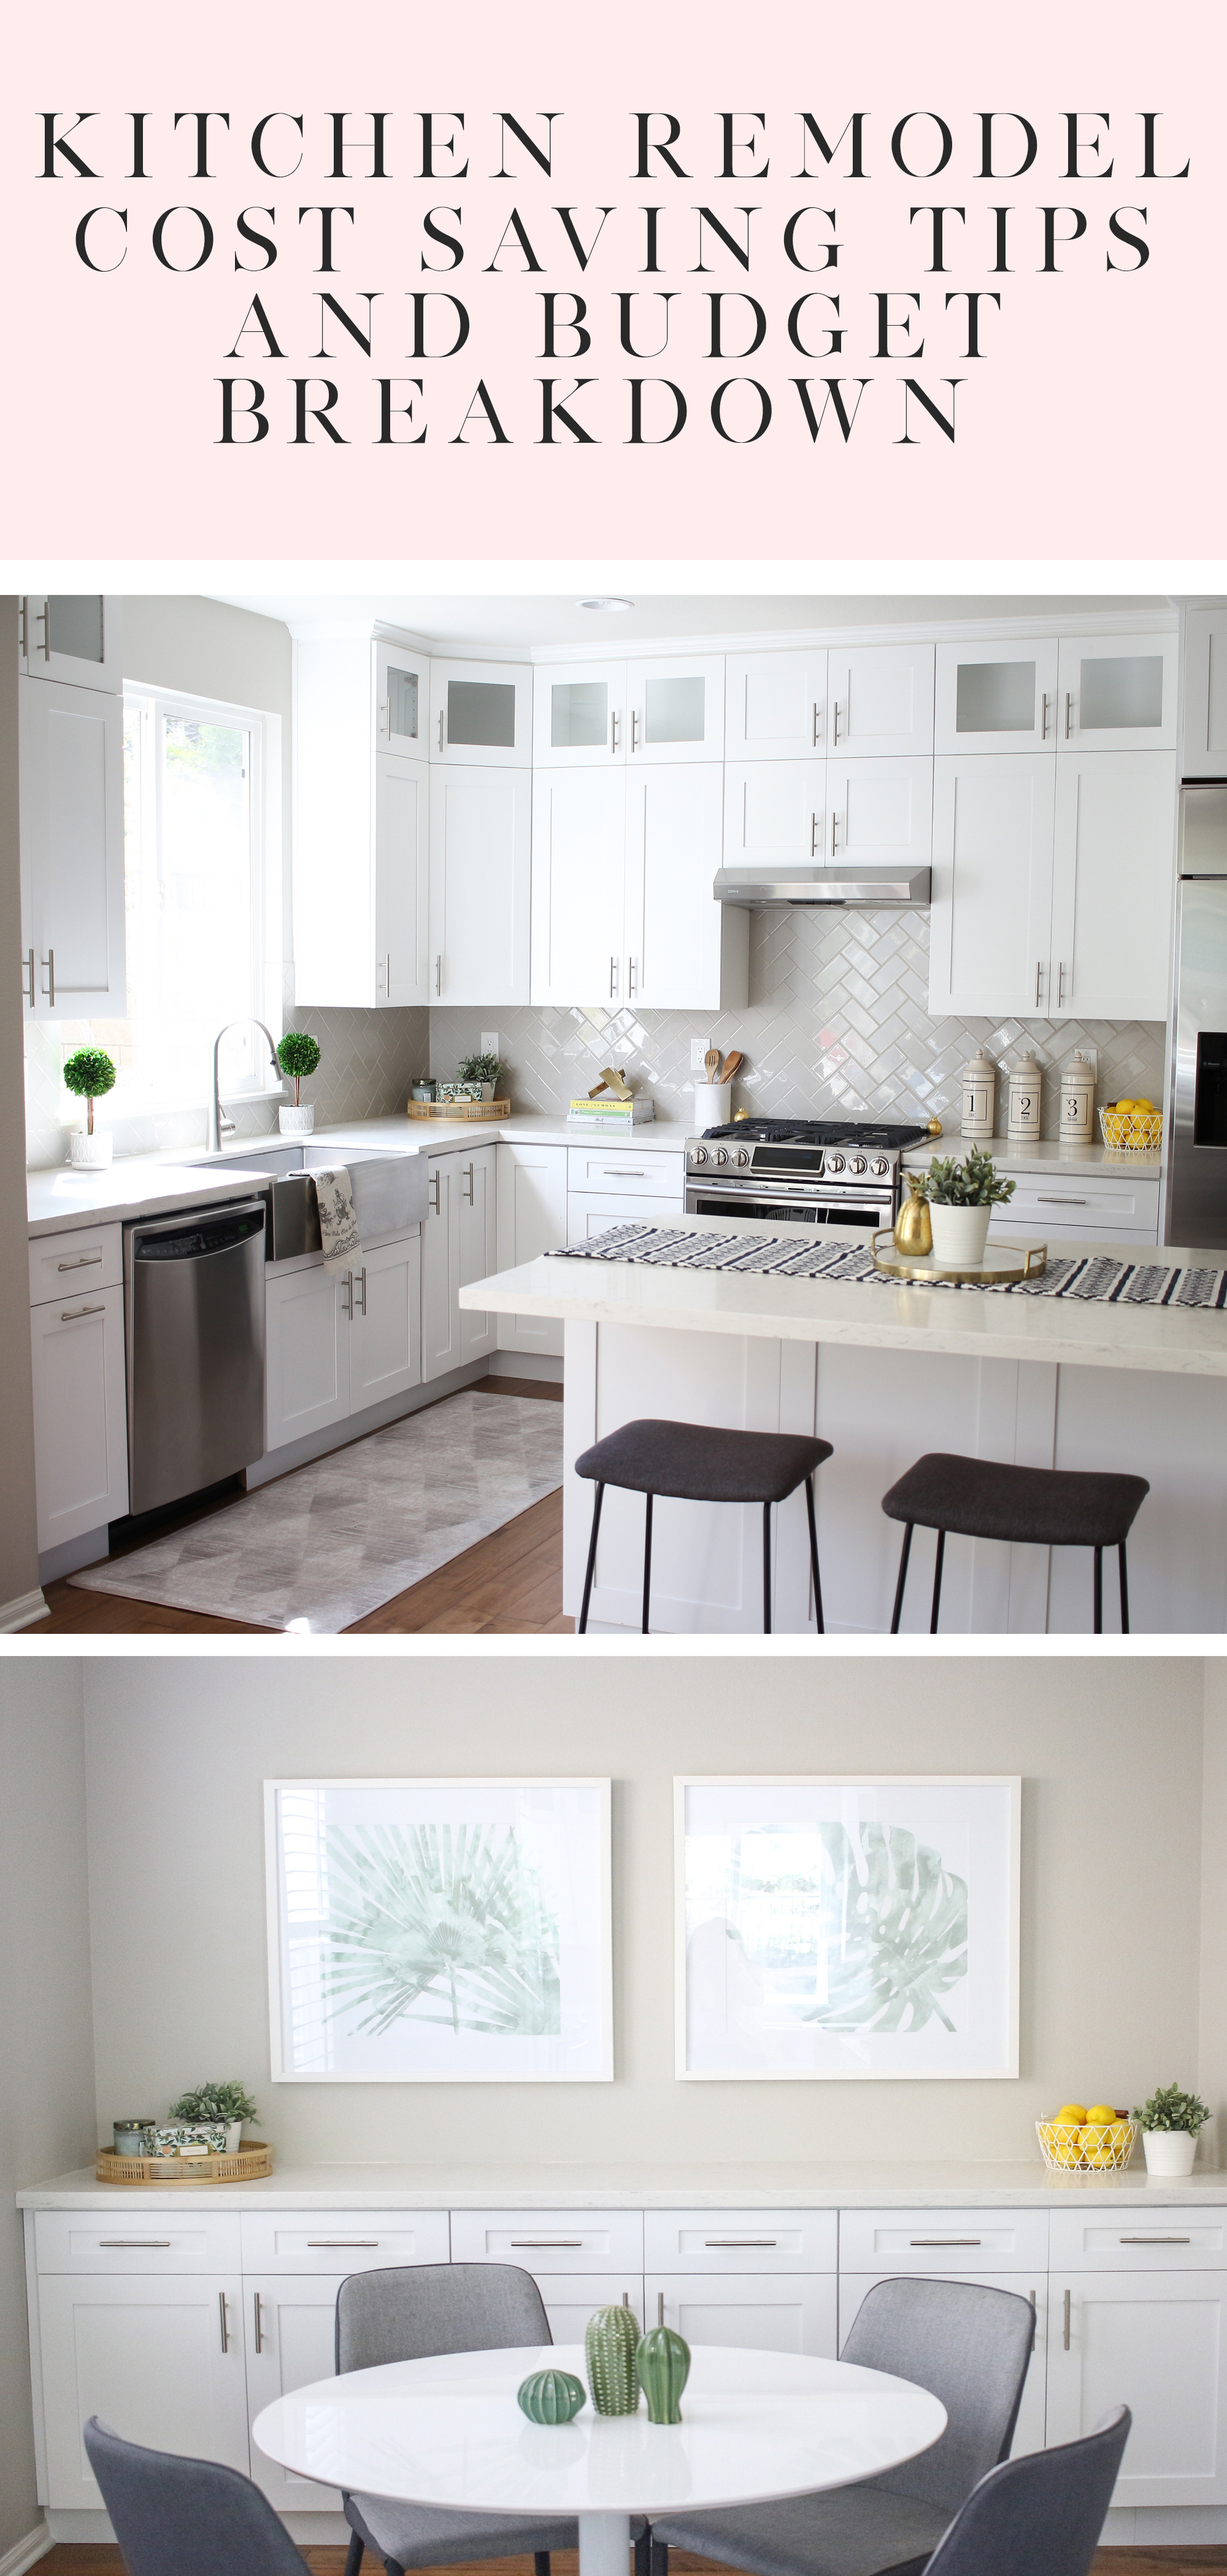 KITCHEN REMODEL COST SAVINGS TIPS AND BUDGET BREAKDOWN